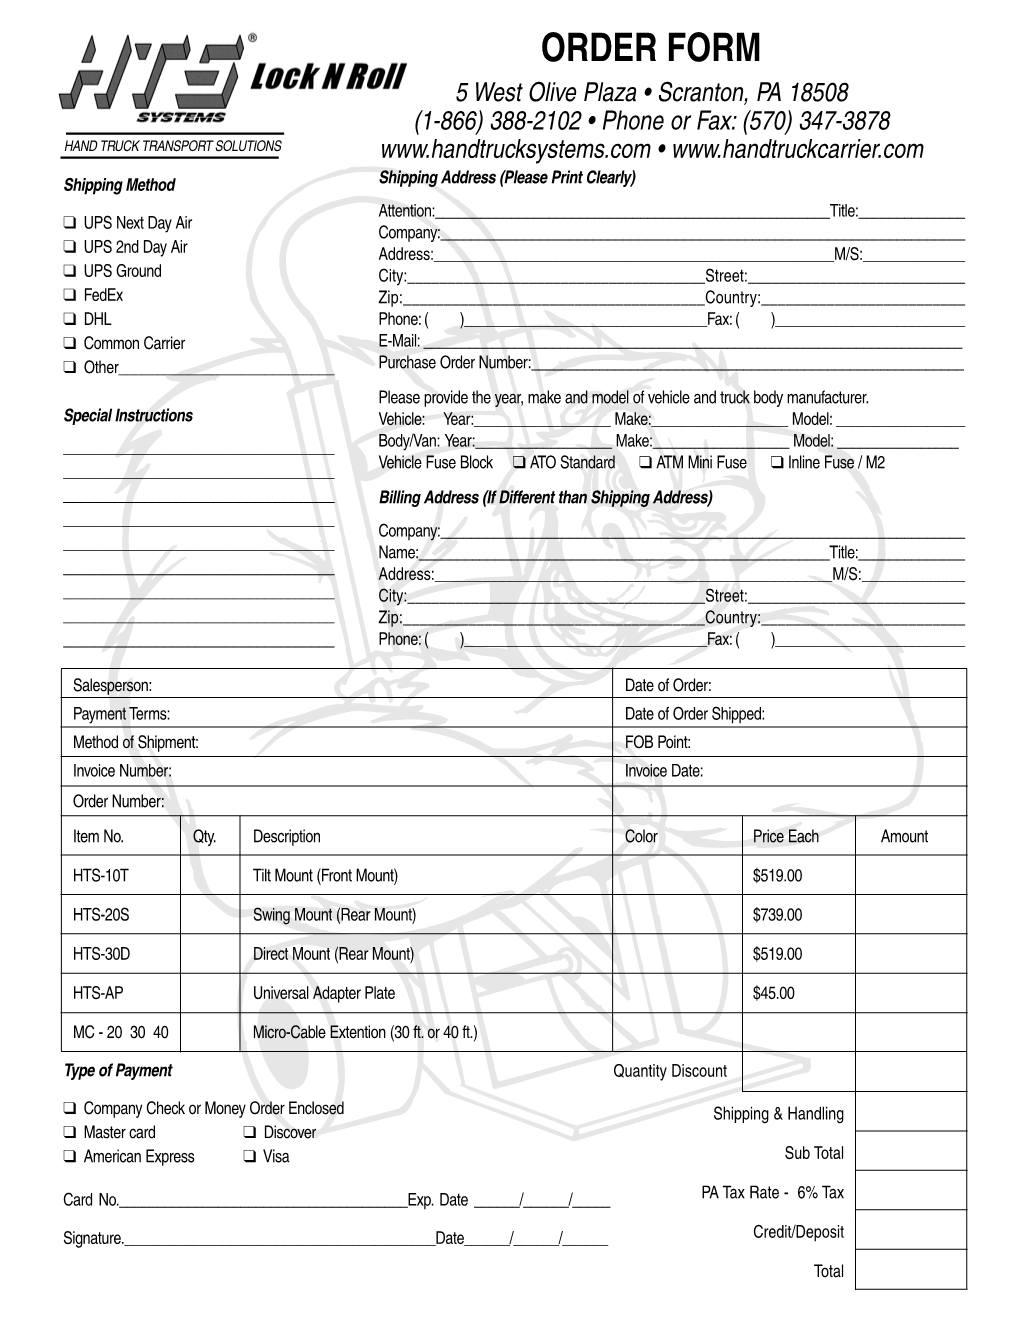 HTS Systems Order Form